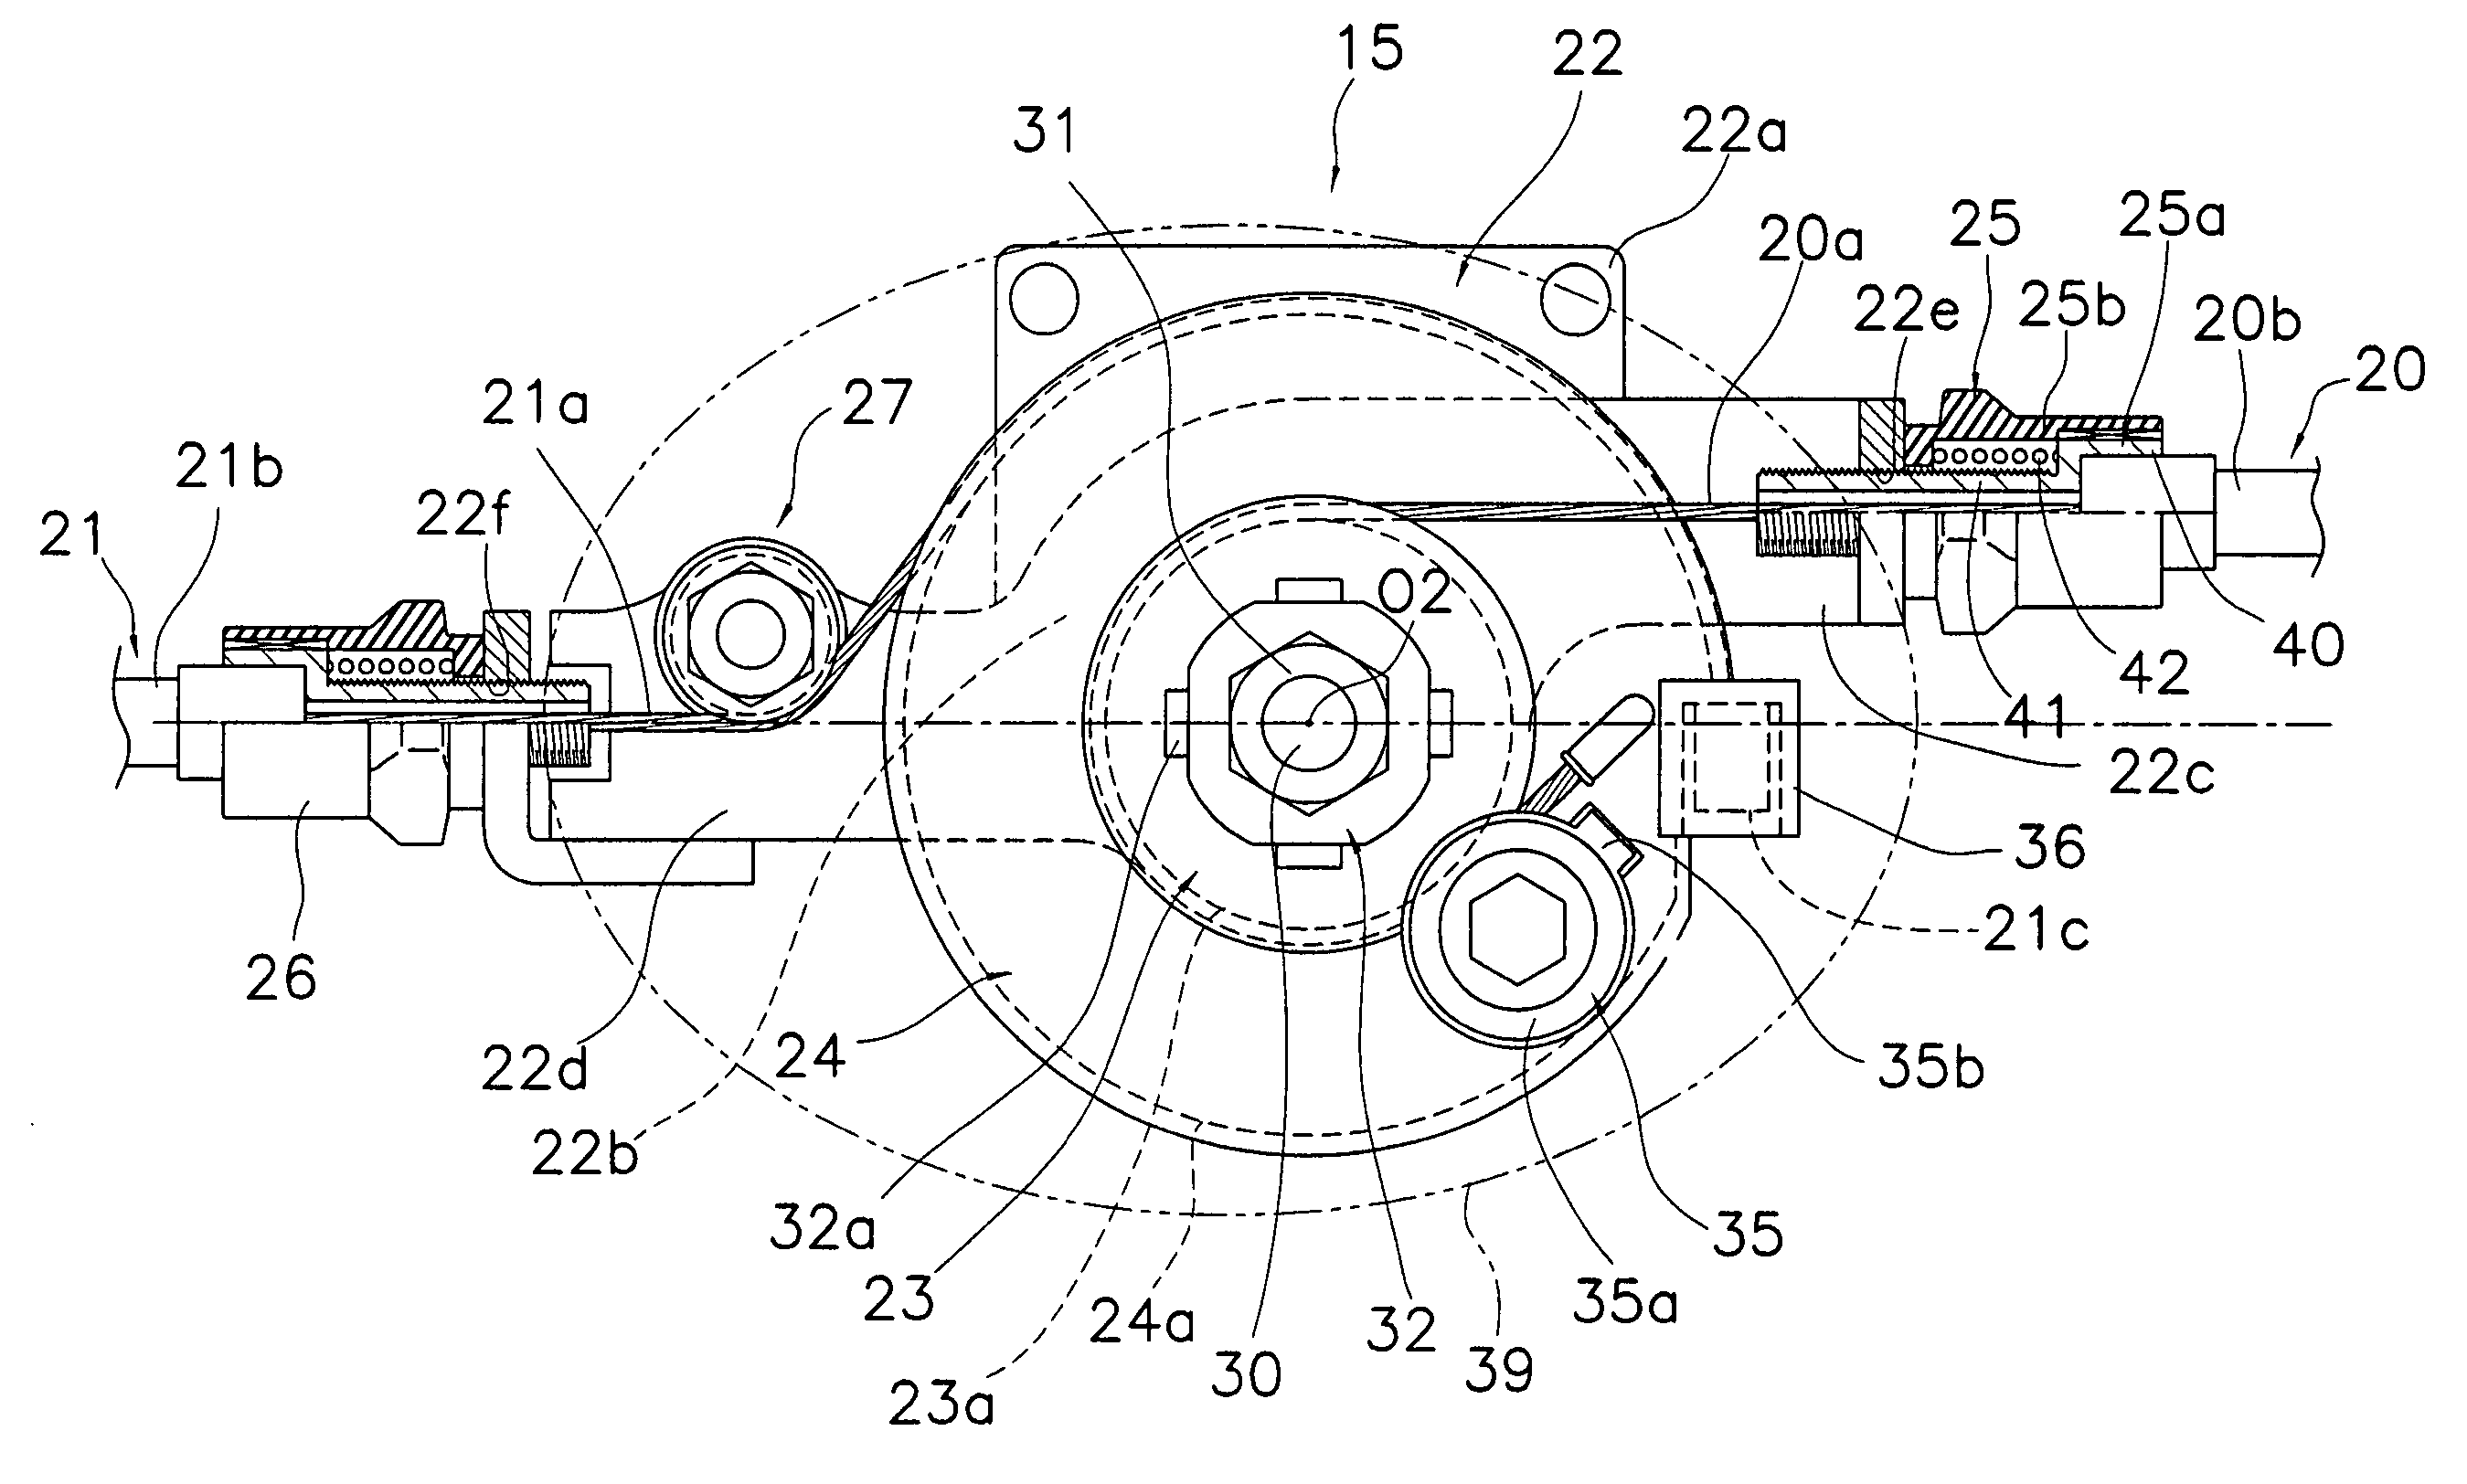 Cable winding conversion device